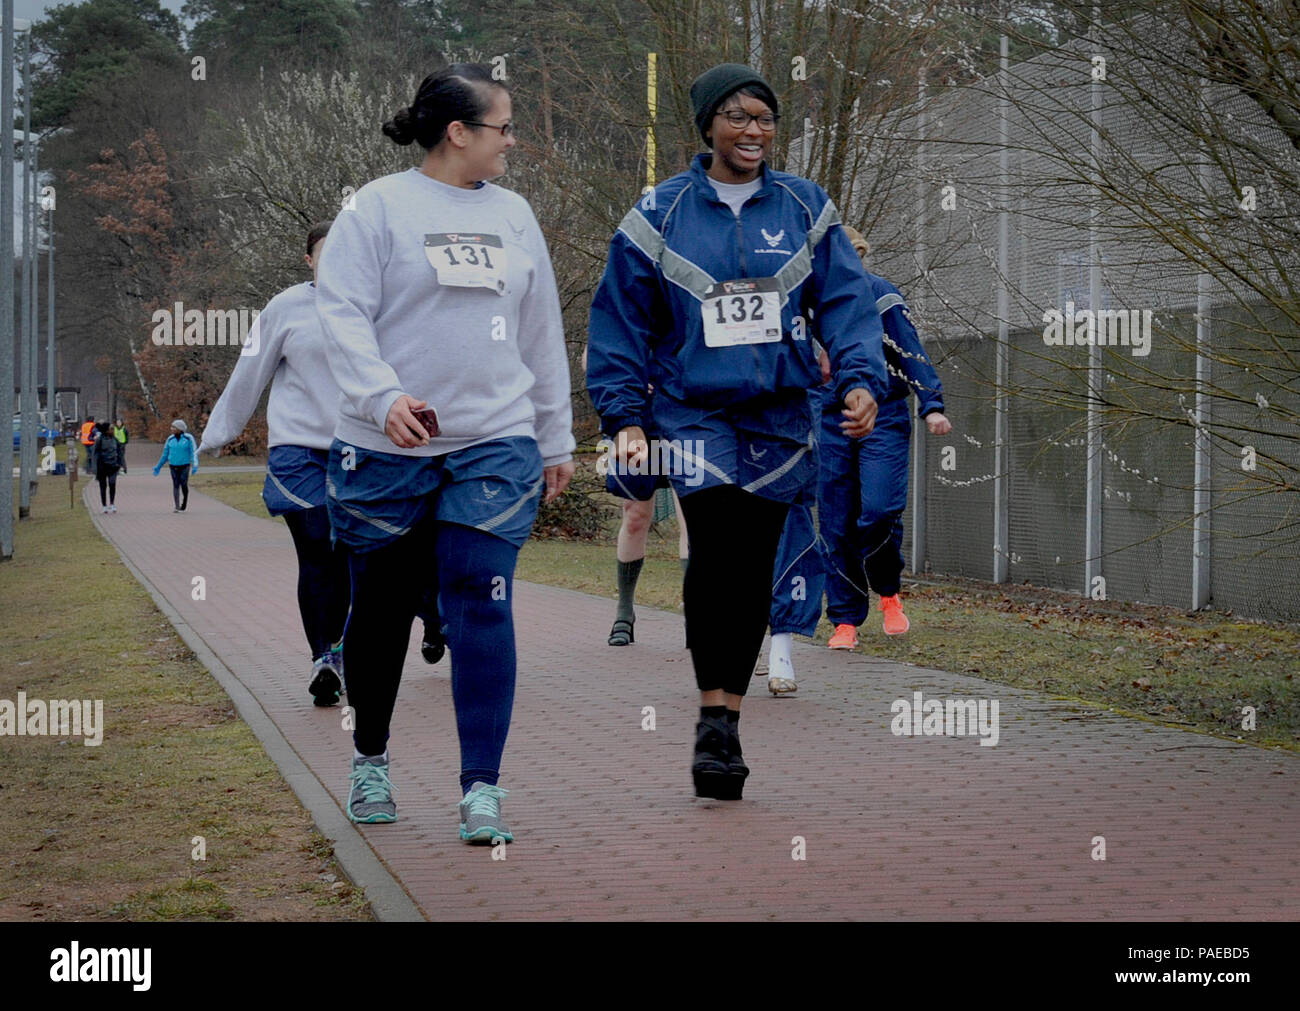 Airmen participate in the first One Mile Walk in Her Heels and 5K Run March 25, 2016, at Ramstein Air Base, Germany. The event raised awareness about sexualized violence against women. (U.S. Air Force photo/Airman 1st Class Larissa Greatwood) Stock Photo